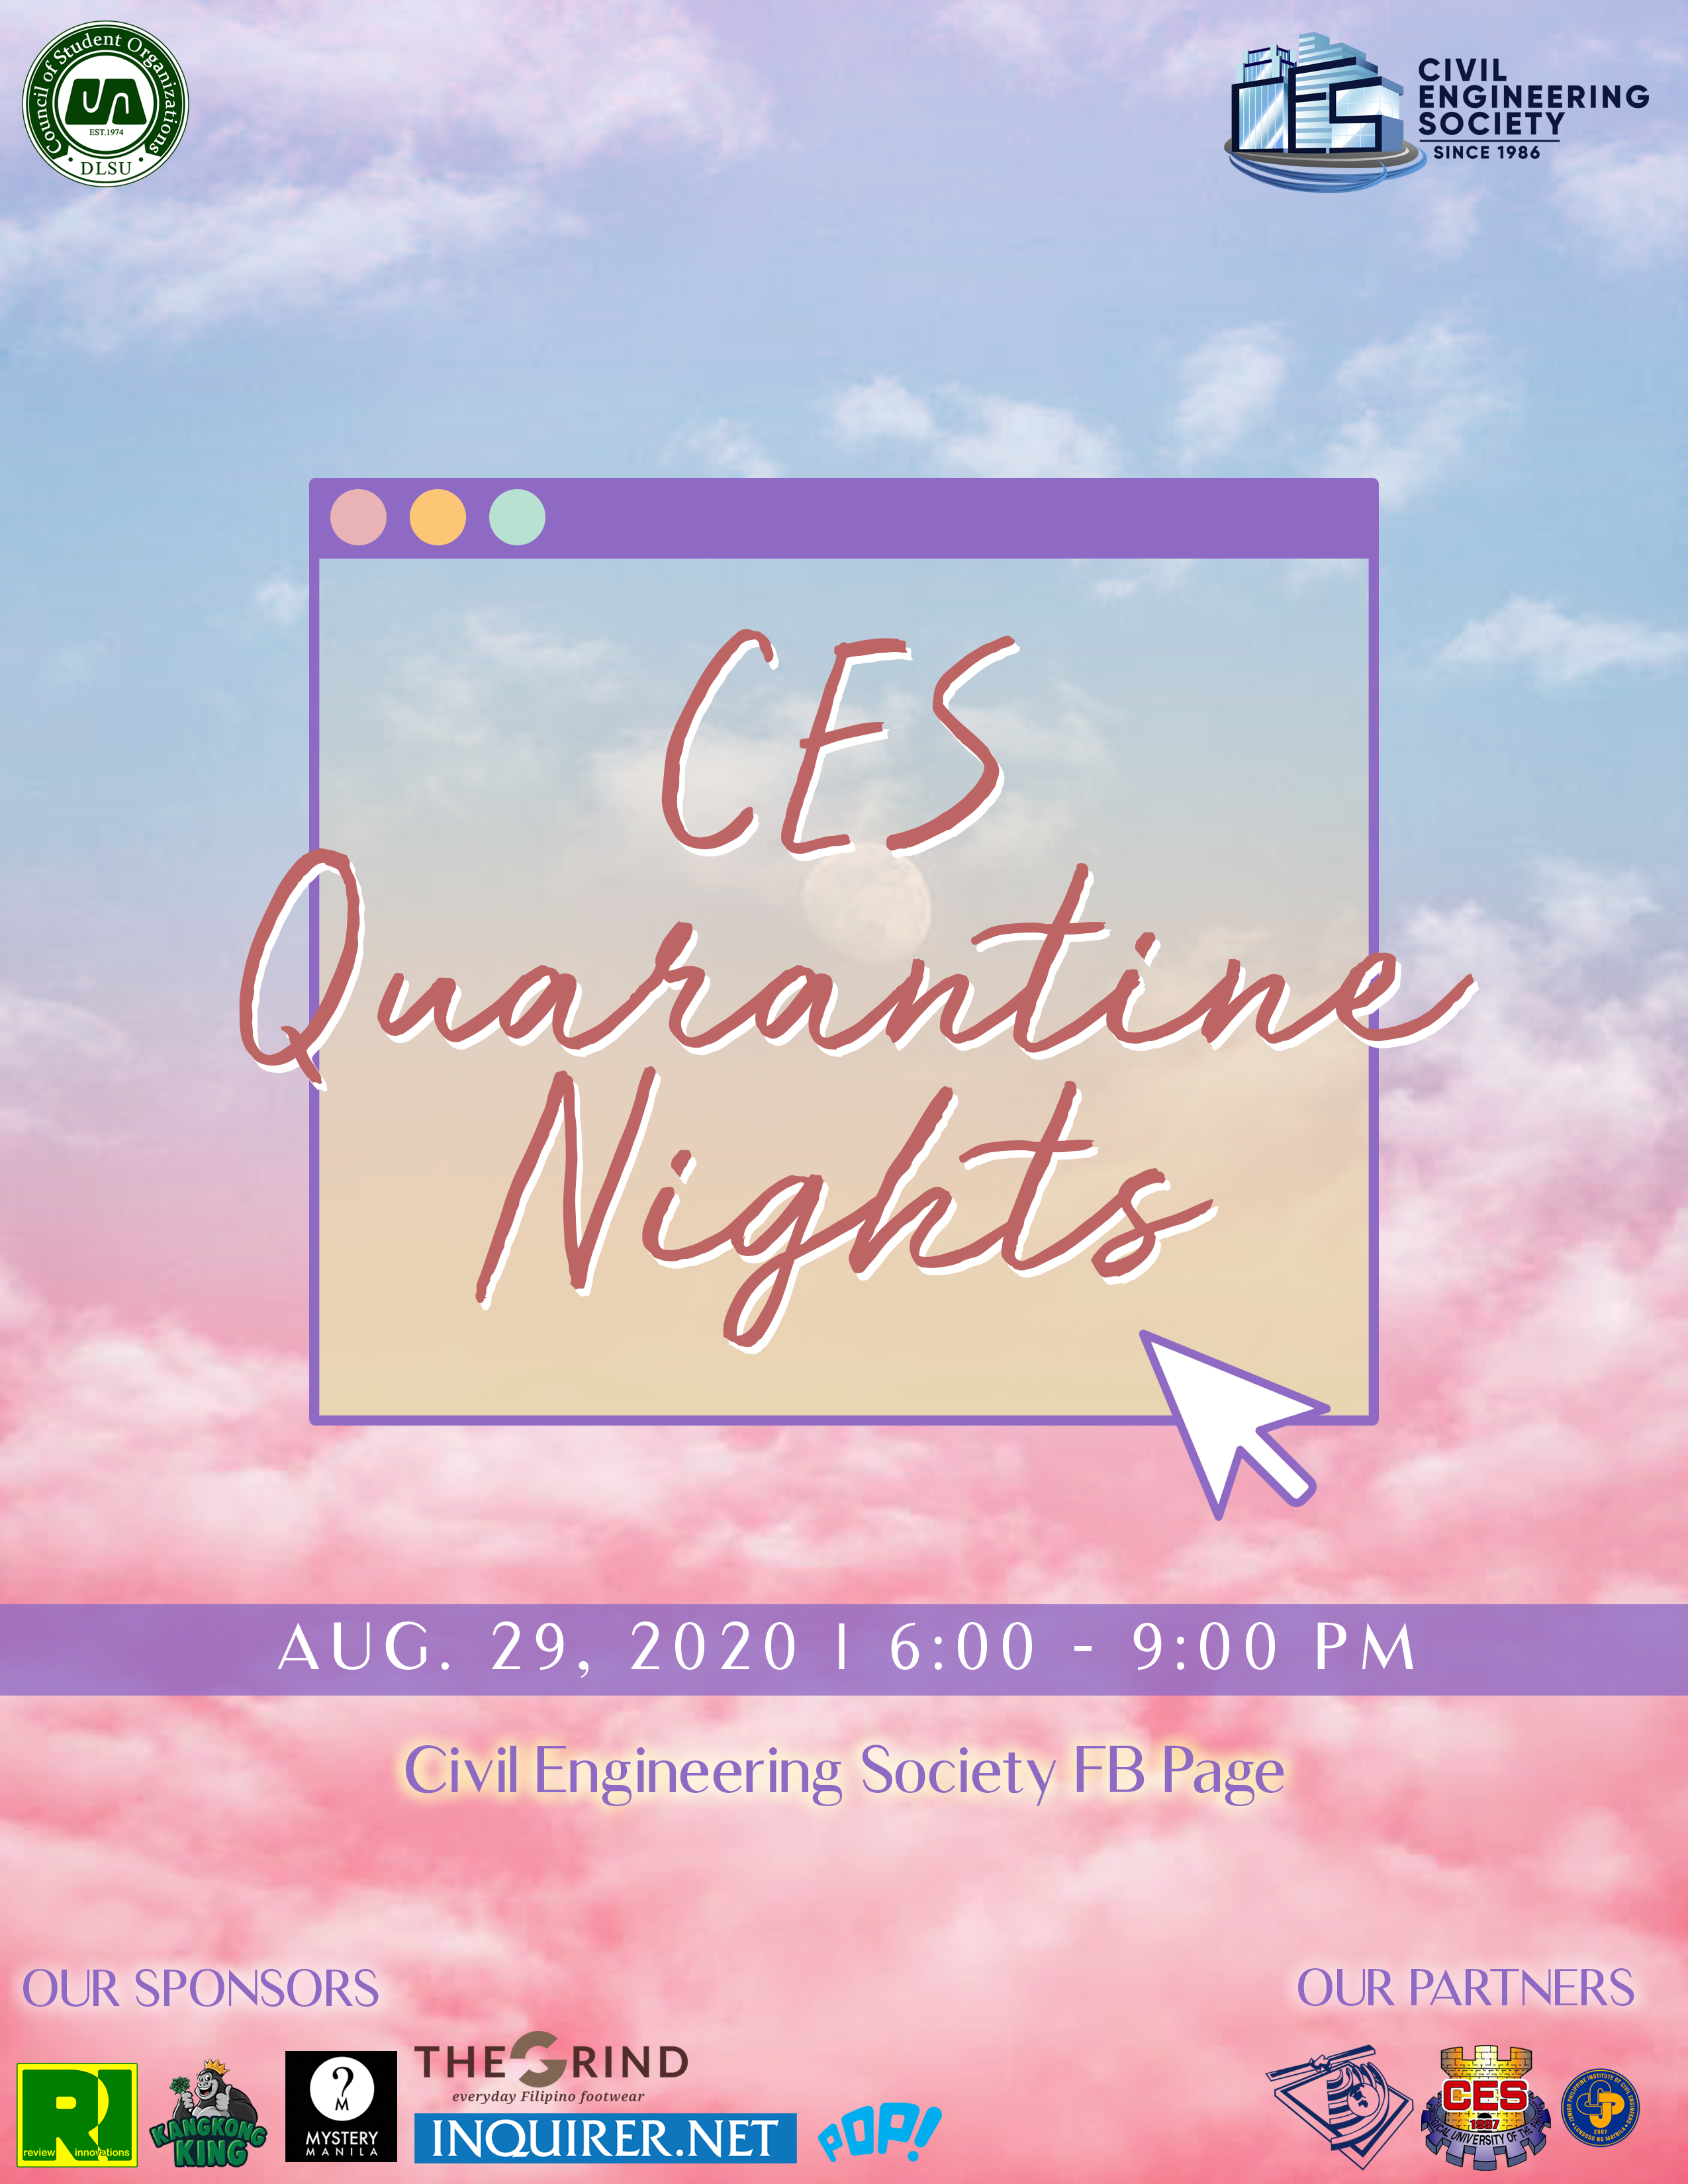 DLSU Civil Engineering Society raises funds for the orphans of Manila in an online benefit  concert — CES Quarantine Nights